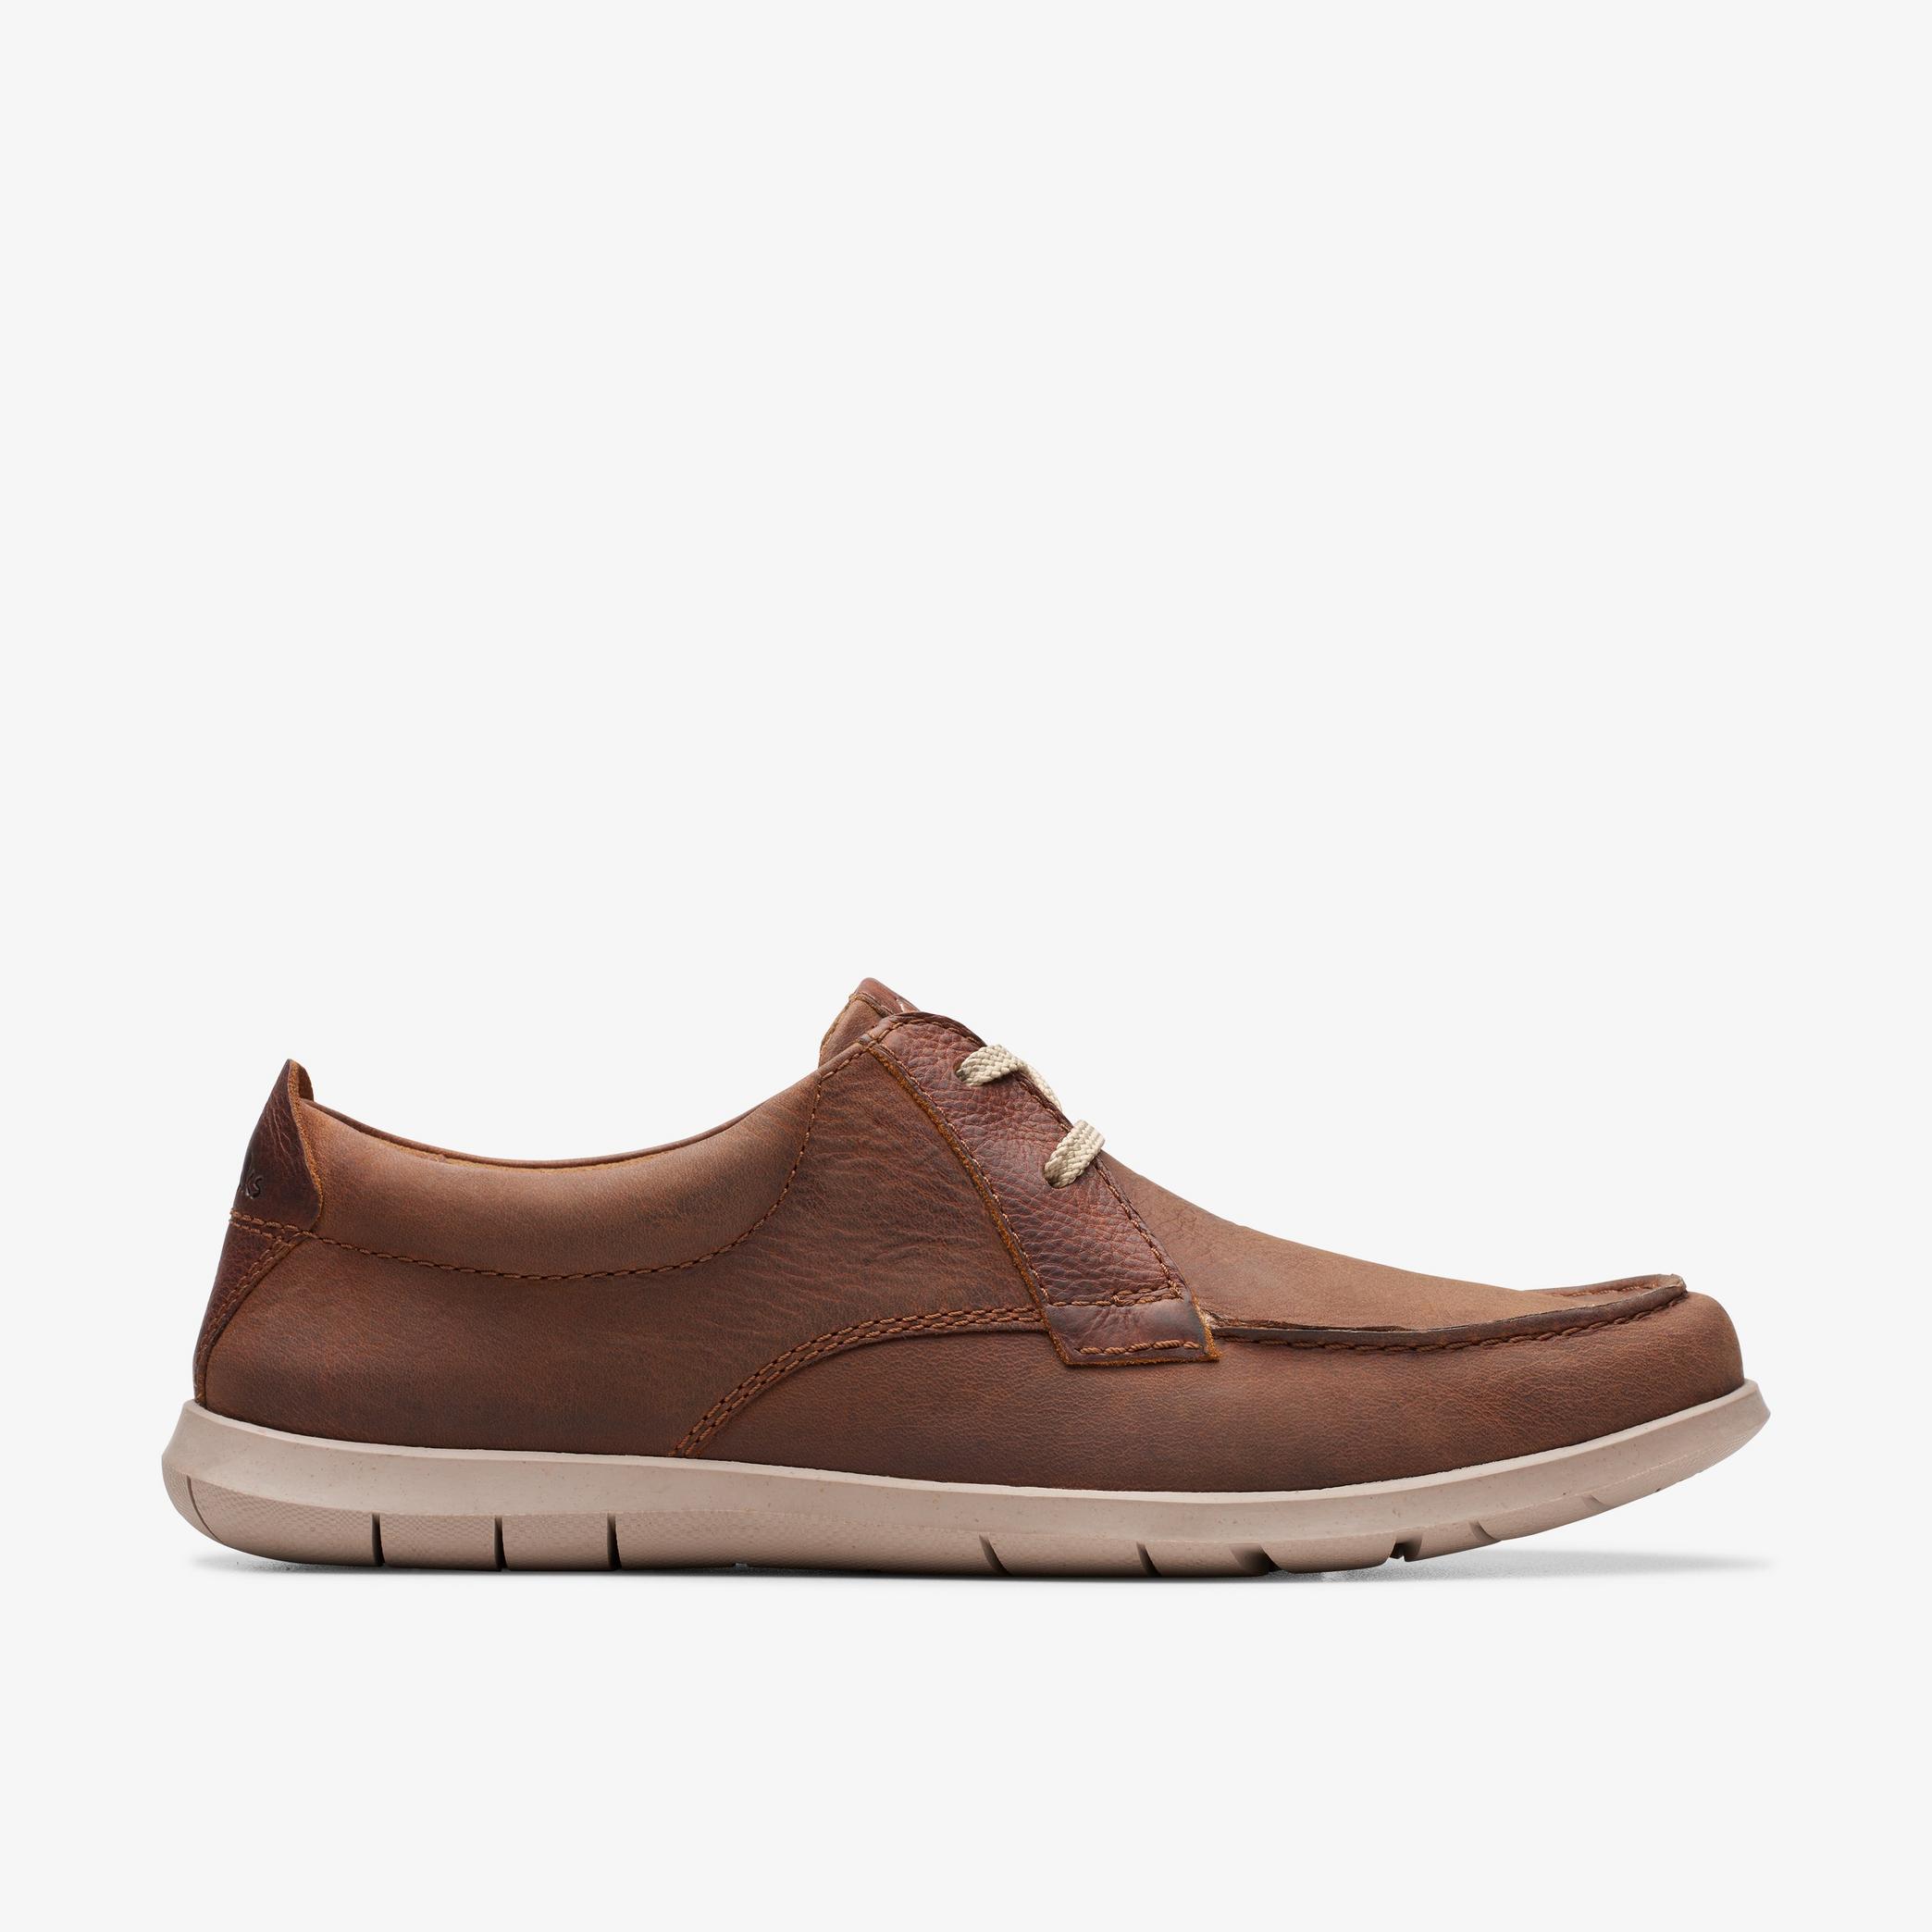 Flexway Lace Dark Tan Leather Boat Shoes, view 1 of 6